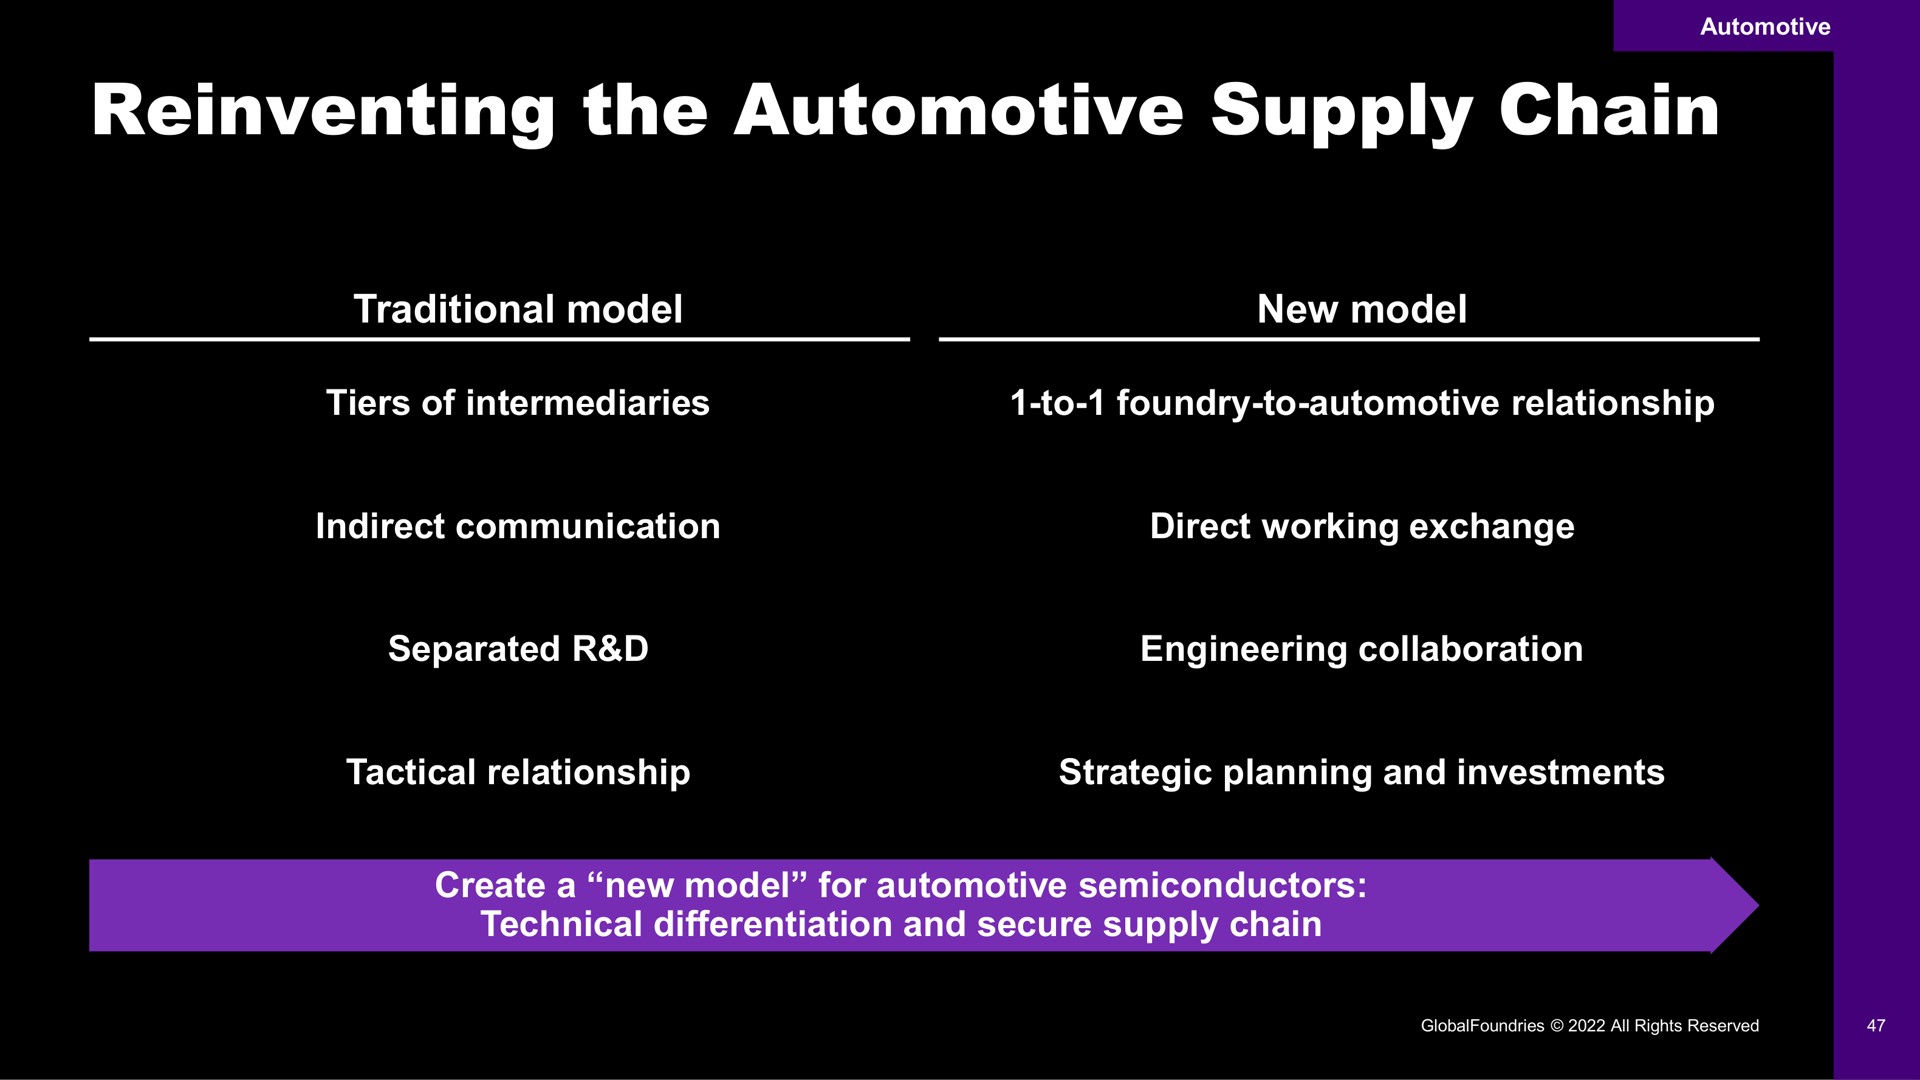 reinventing the automotive supply chain | GlobalFoundries